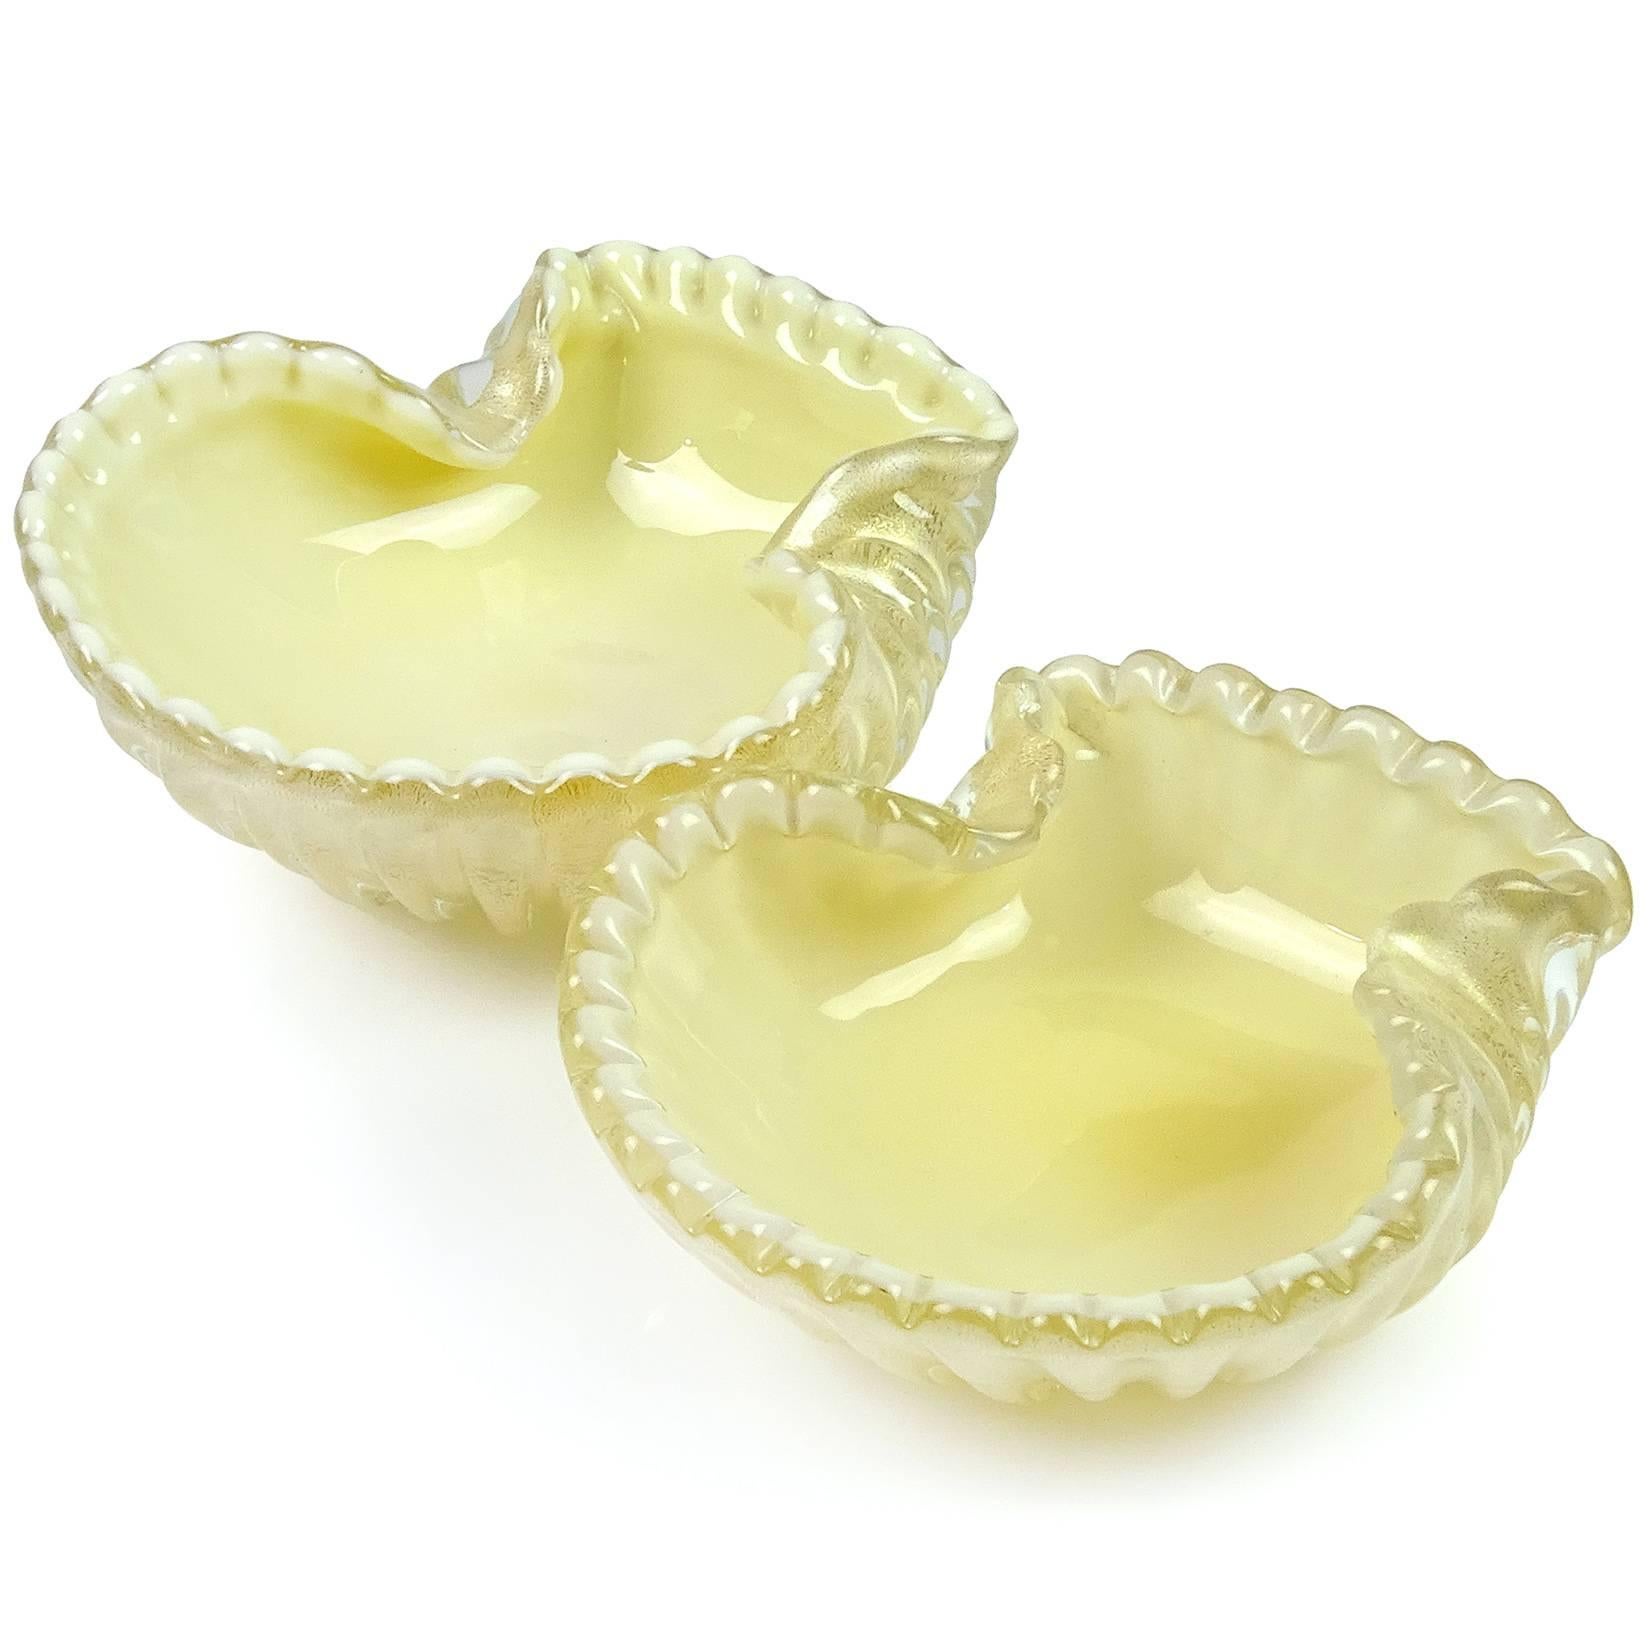 Beautiful Murano hand blown gold flecks over white, and creamy yellow art glass ribbed seashell bowls. Attributed to designer Archimede Seguso. They are profusely covered in gold leaf. Priced as a set, but can be sold separately. They measure 5 3/4